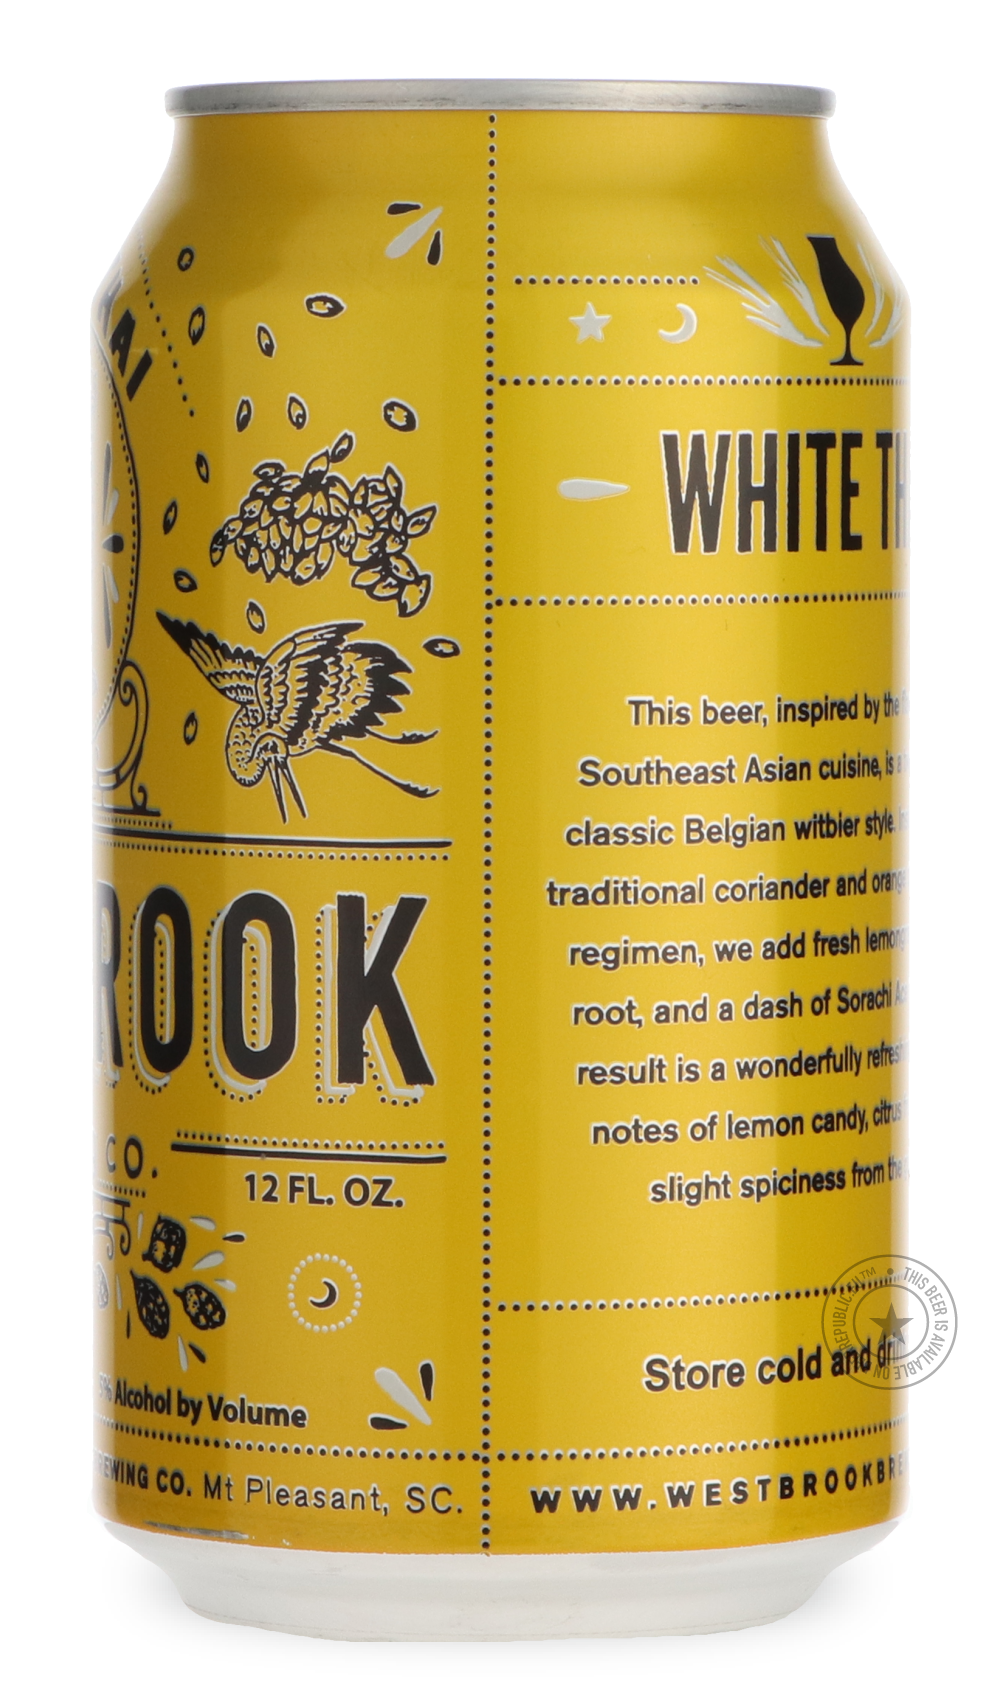 -Westbrook- White Thai-Pale- Only @ Beer Republic - The best online beer store for American & Canadian craft beer - Buy beer online from the USA and Canada - Bier online kopen - Amerikaans bier kopen - Craft beer store - Craft beer kopen - Amerikanisch bier kaufen - Bier online kaufen - Acheter biere online - IPA - Stout - Porter - New England IPA - Hazy IPA - Imperial Stout - Barrel Aged - Barrel Aged Imperial Stout - Brown - Dark beer - Blond - Blonde - Pilsner - Lager - Wheat - Weizen - Amber - Barley Wi